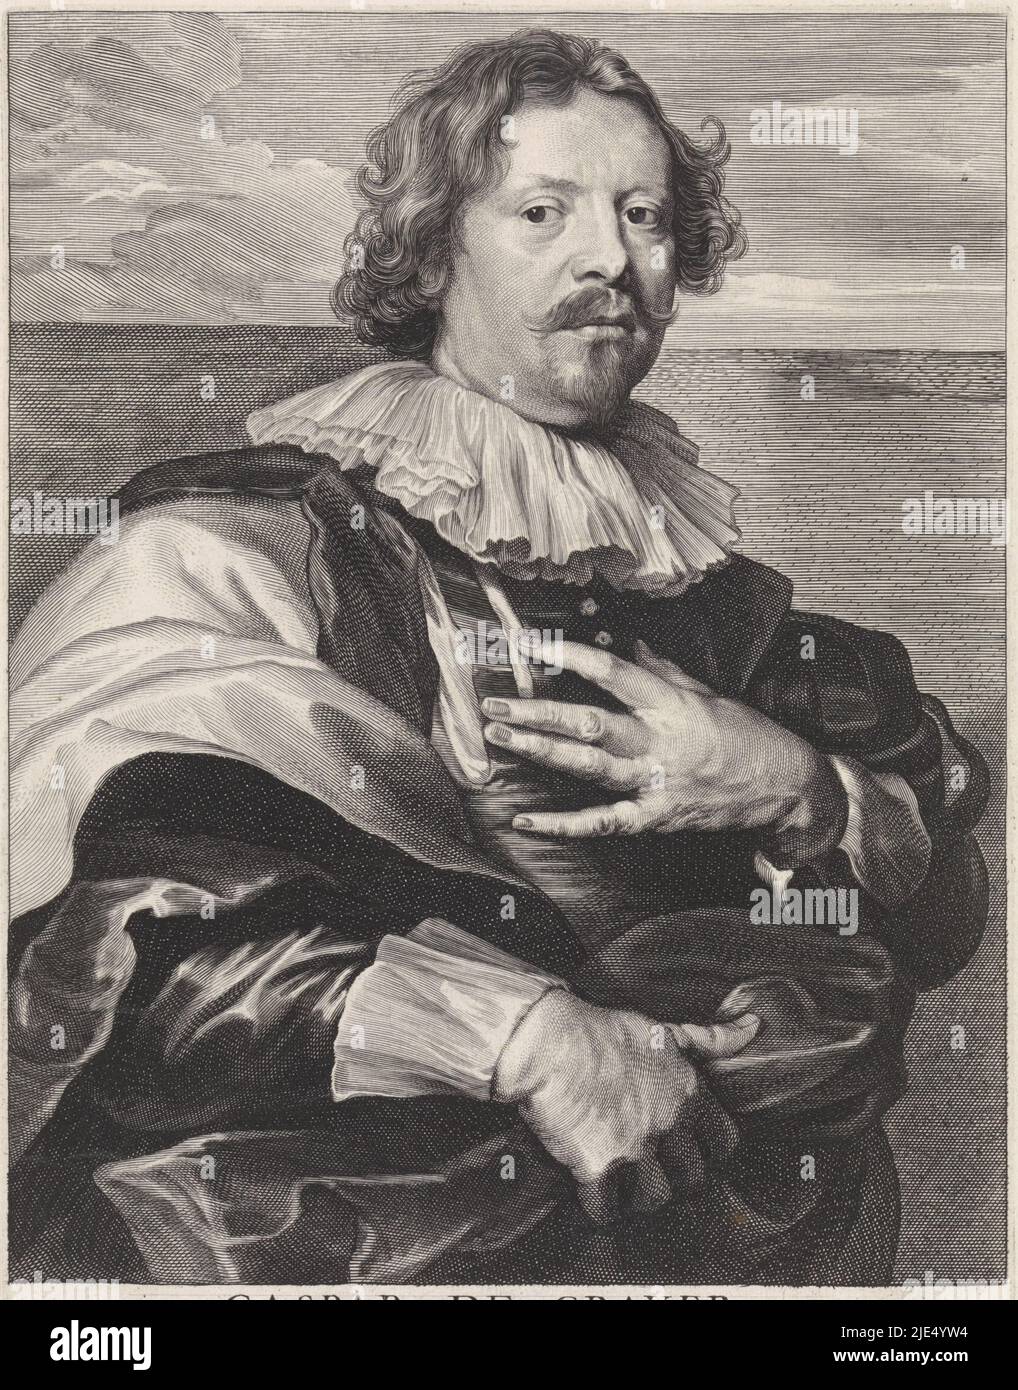 Portrait of the painter Gaspar de Crayer, print maker: Paulus Pontius, (mentioned on object), after: Anthony van Dyck, (mentioned on object), unknown, (mentioned on object), Antwerp, 1616 - 1657, paper, engraving, h 247 mm × w 179 mm Stock Photo